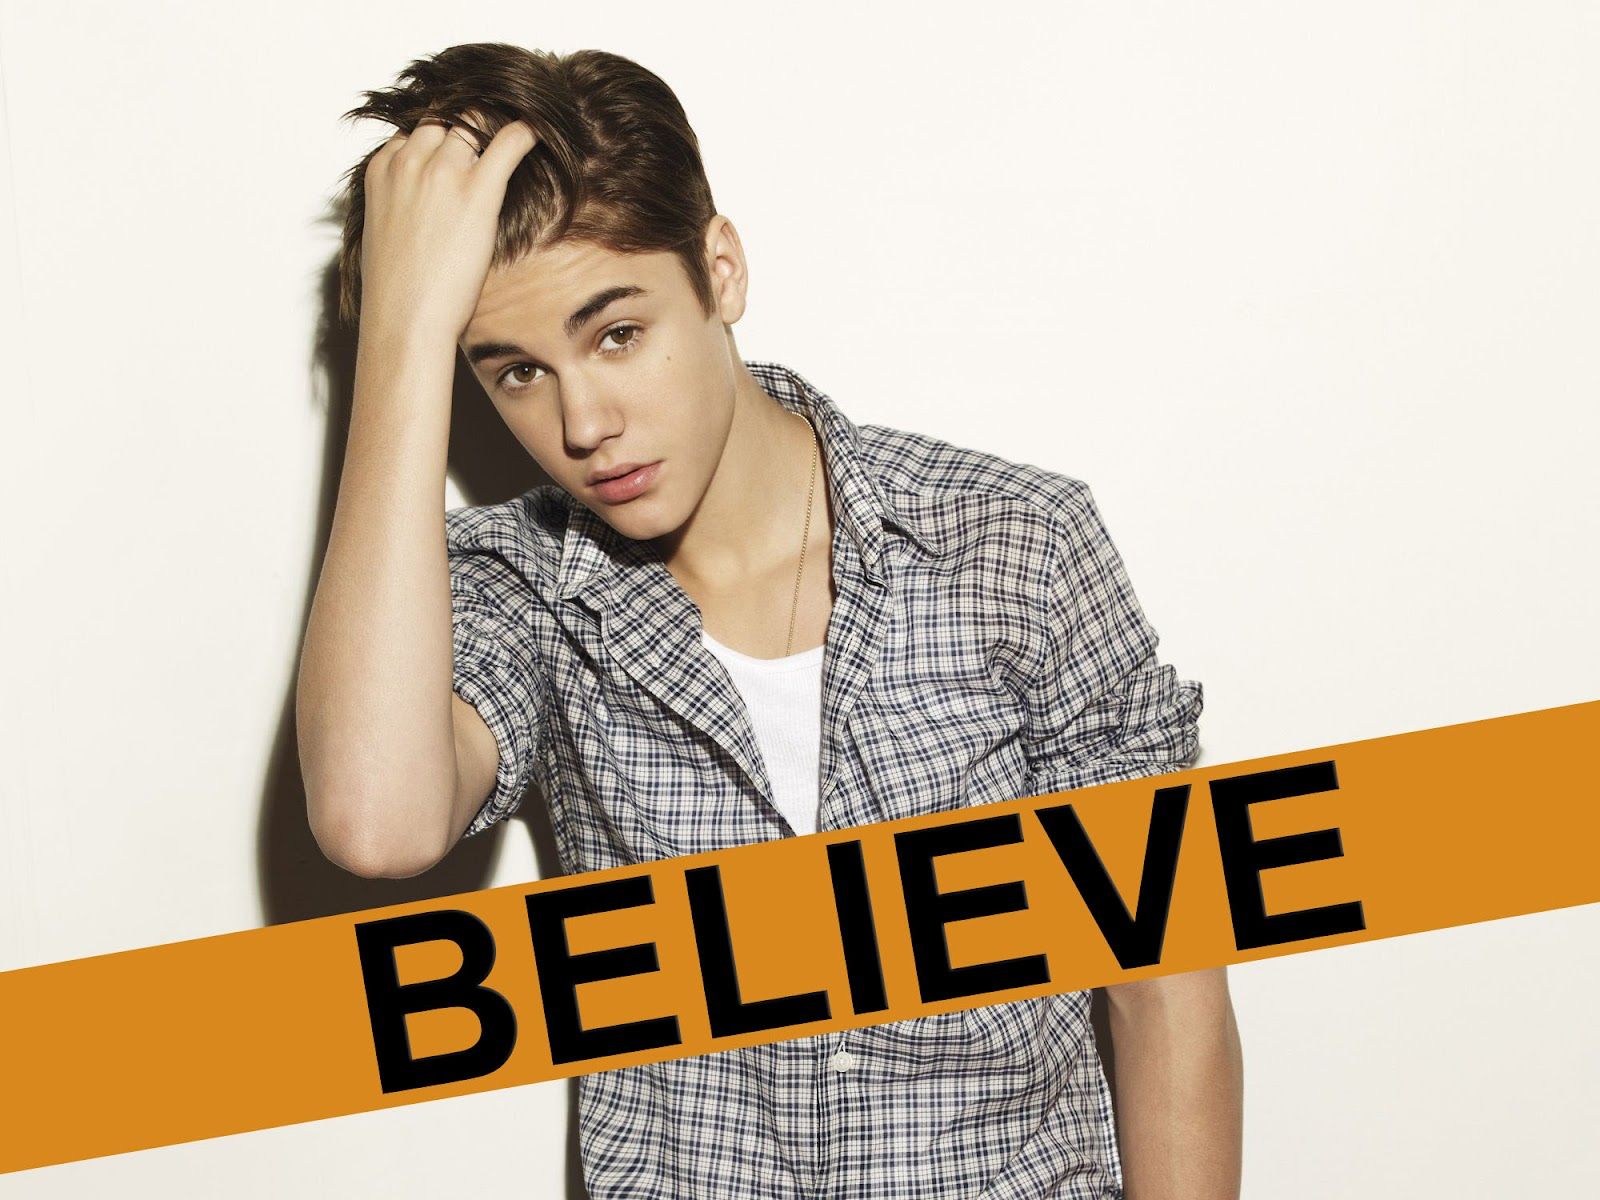 Free Download Justin Bieber Images Wallpapers.